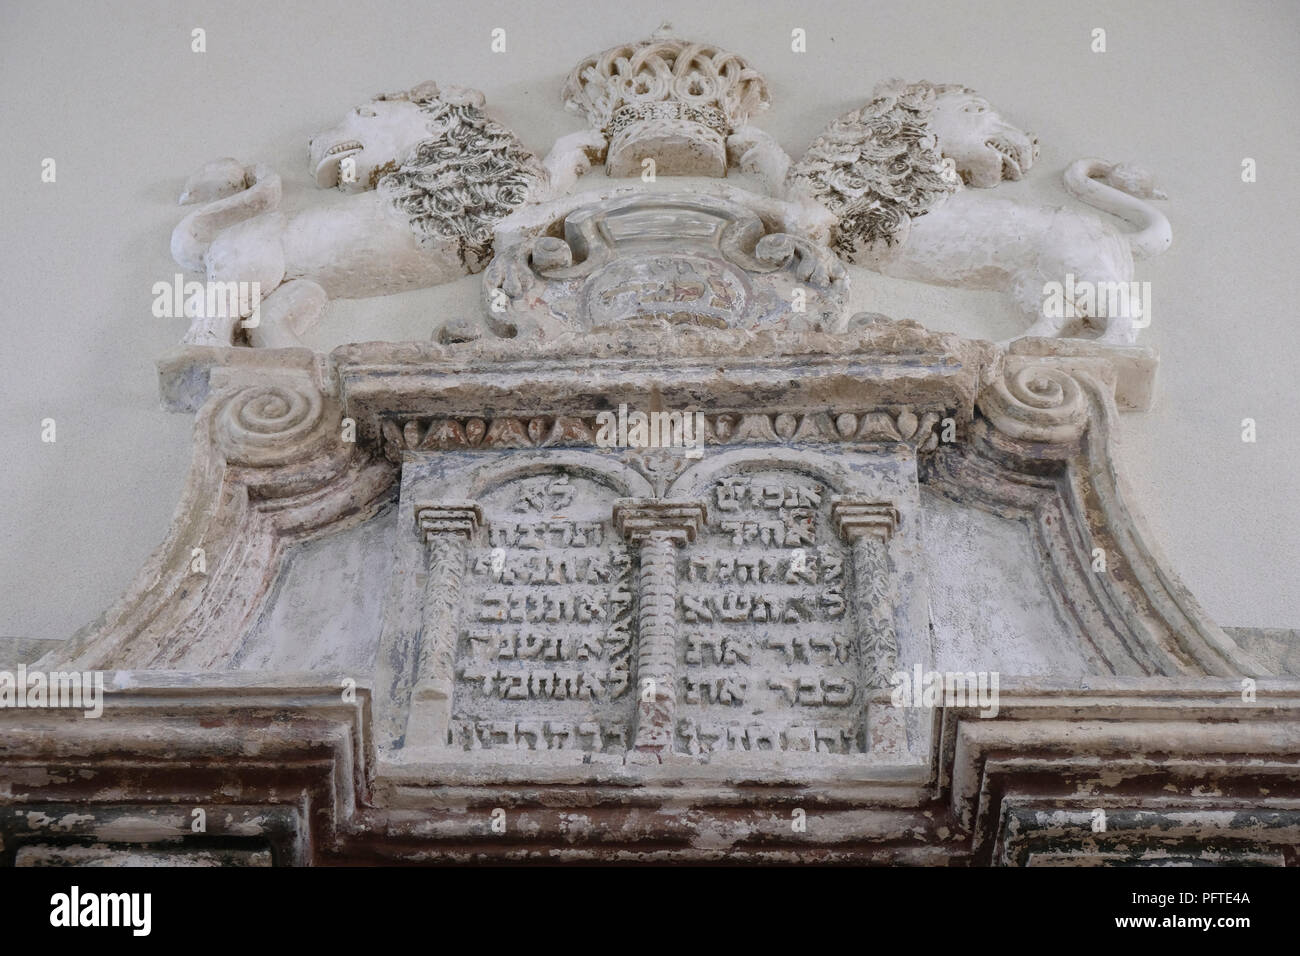 Remain of the original Torah Ark at the renovated 17th century synagogue in the town of Sataniv which was once home to a large Jewish community and was annihilated, brutally, by the Germans during the Second World War in the Horodok Raion, Khmelnytskyi Oblast, Ukraine. Stock Photo